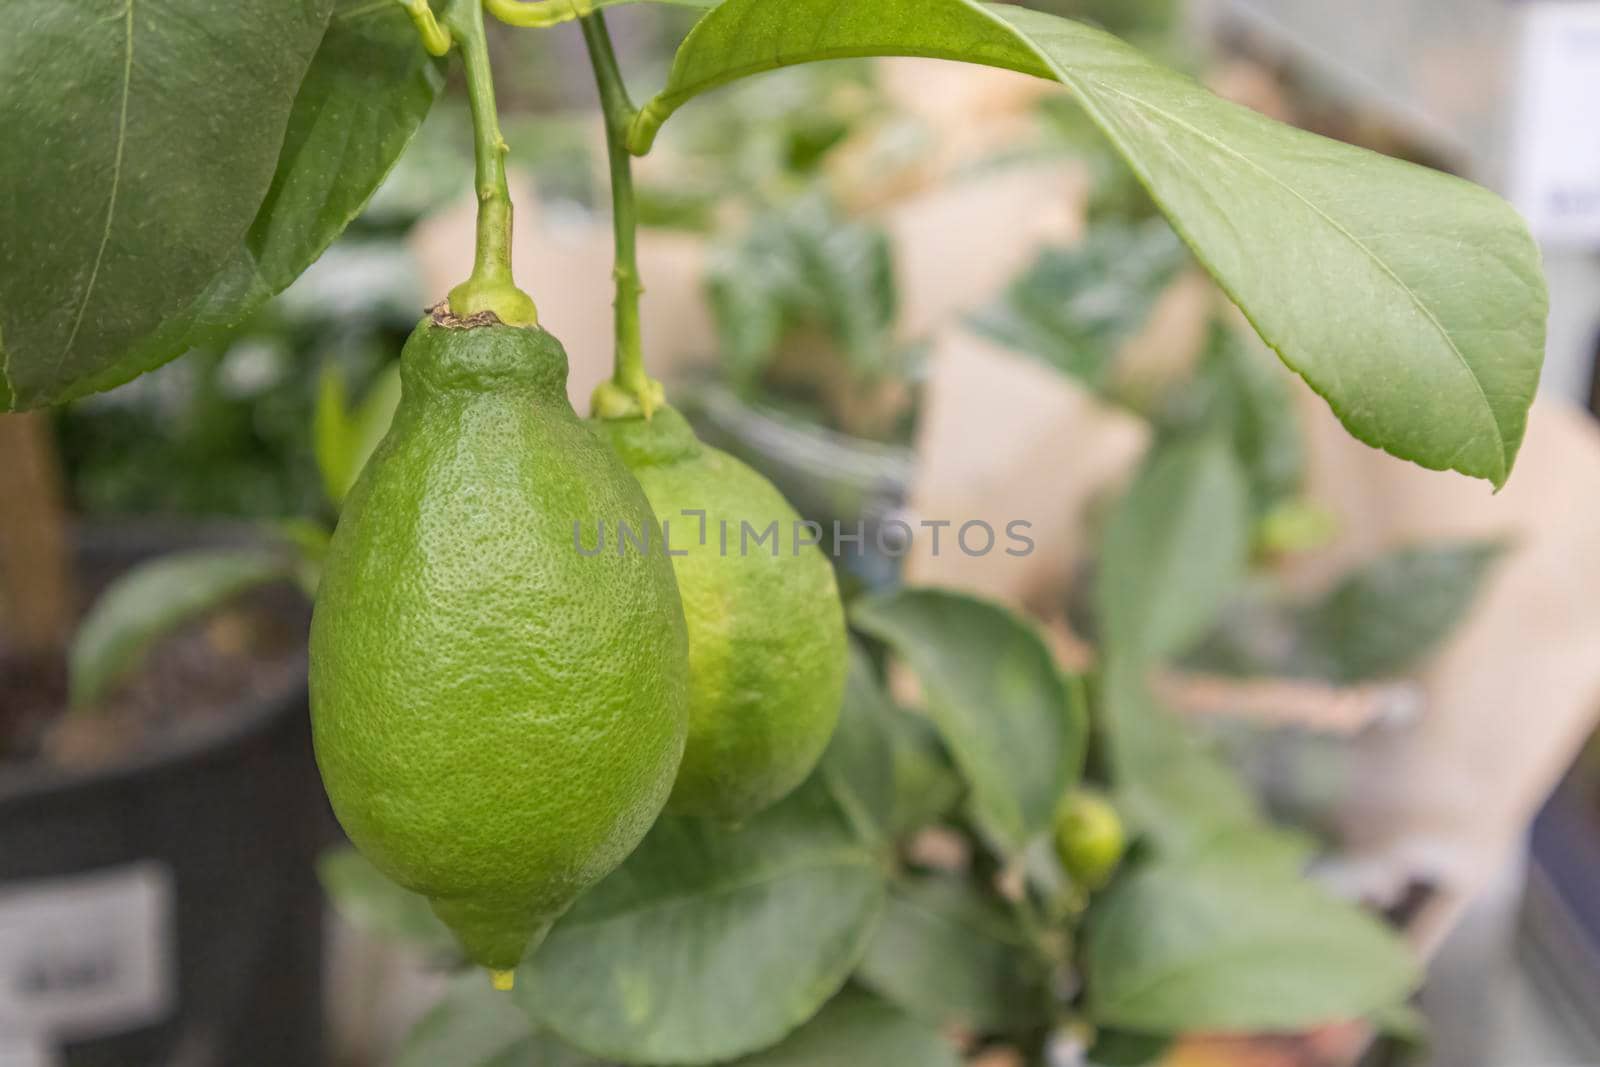 the fruits of a green lemon on a branch on the shelves of stores. High quality photo